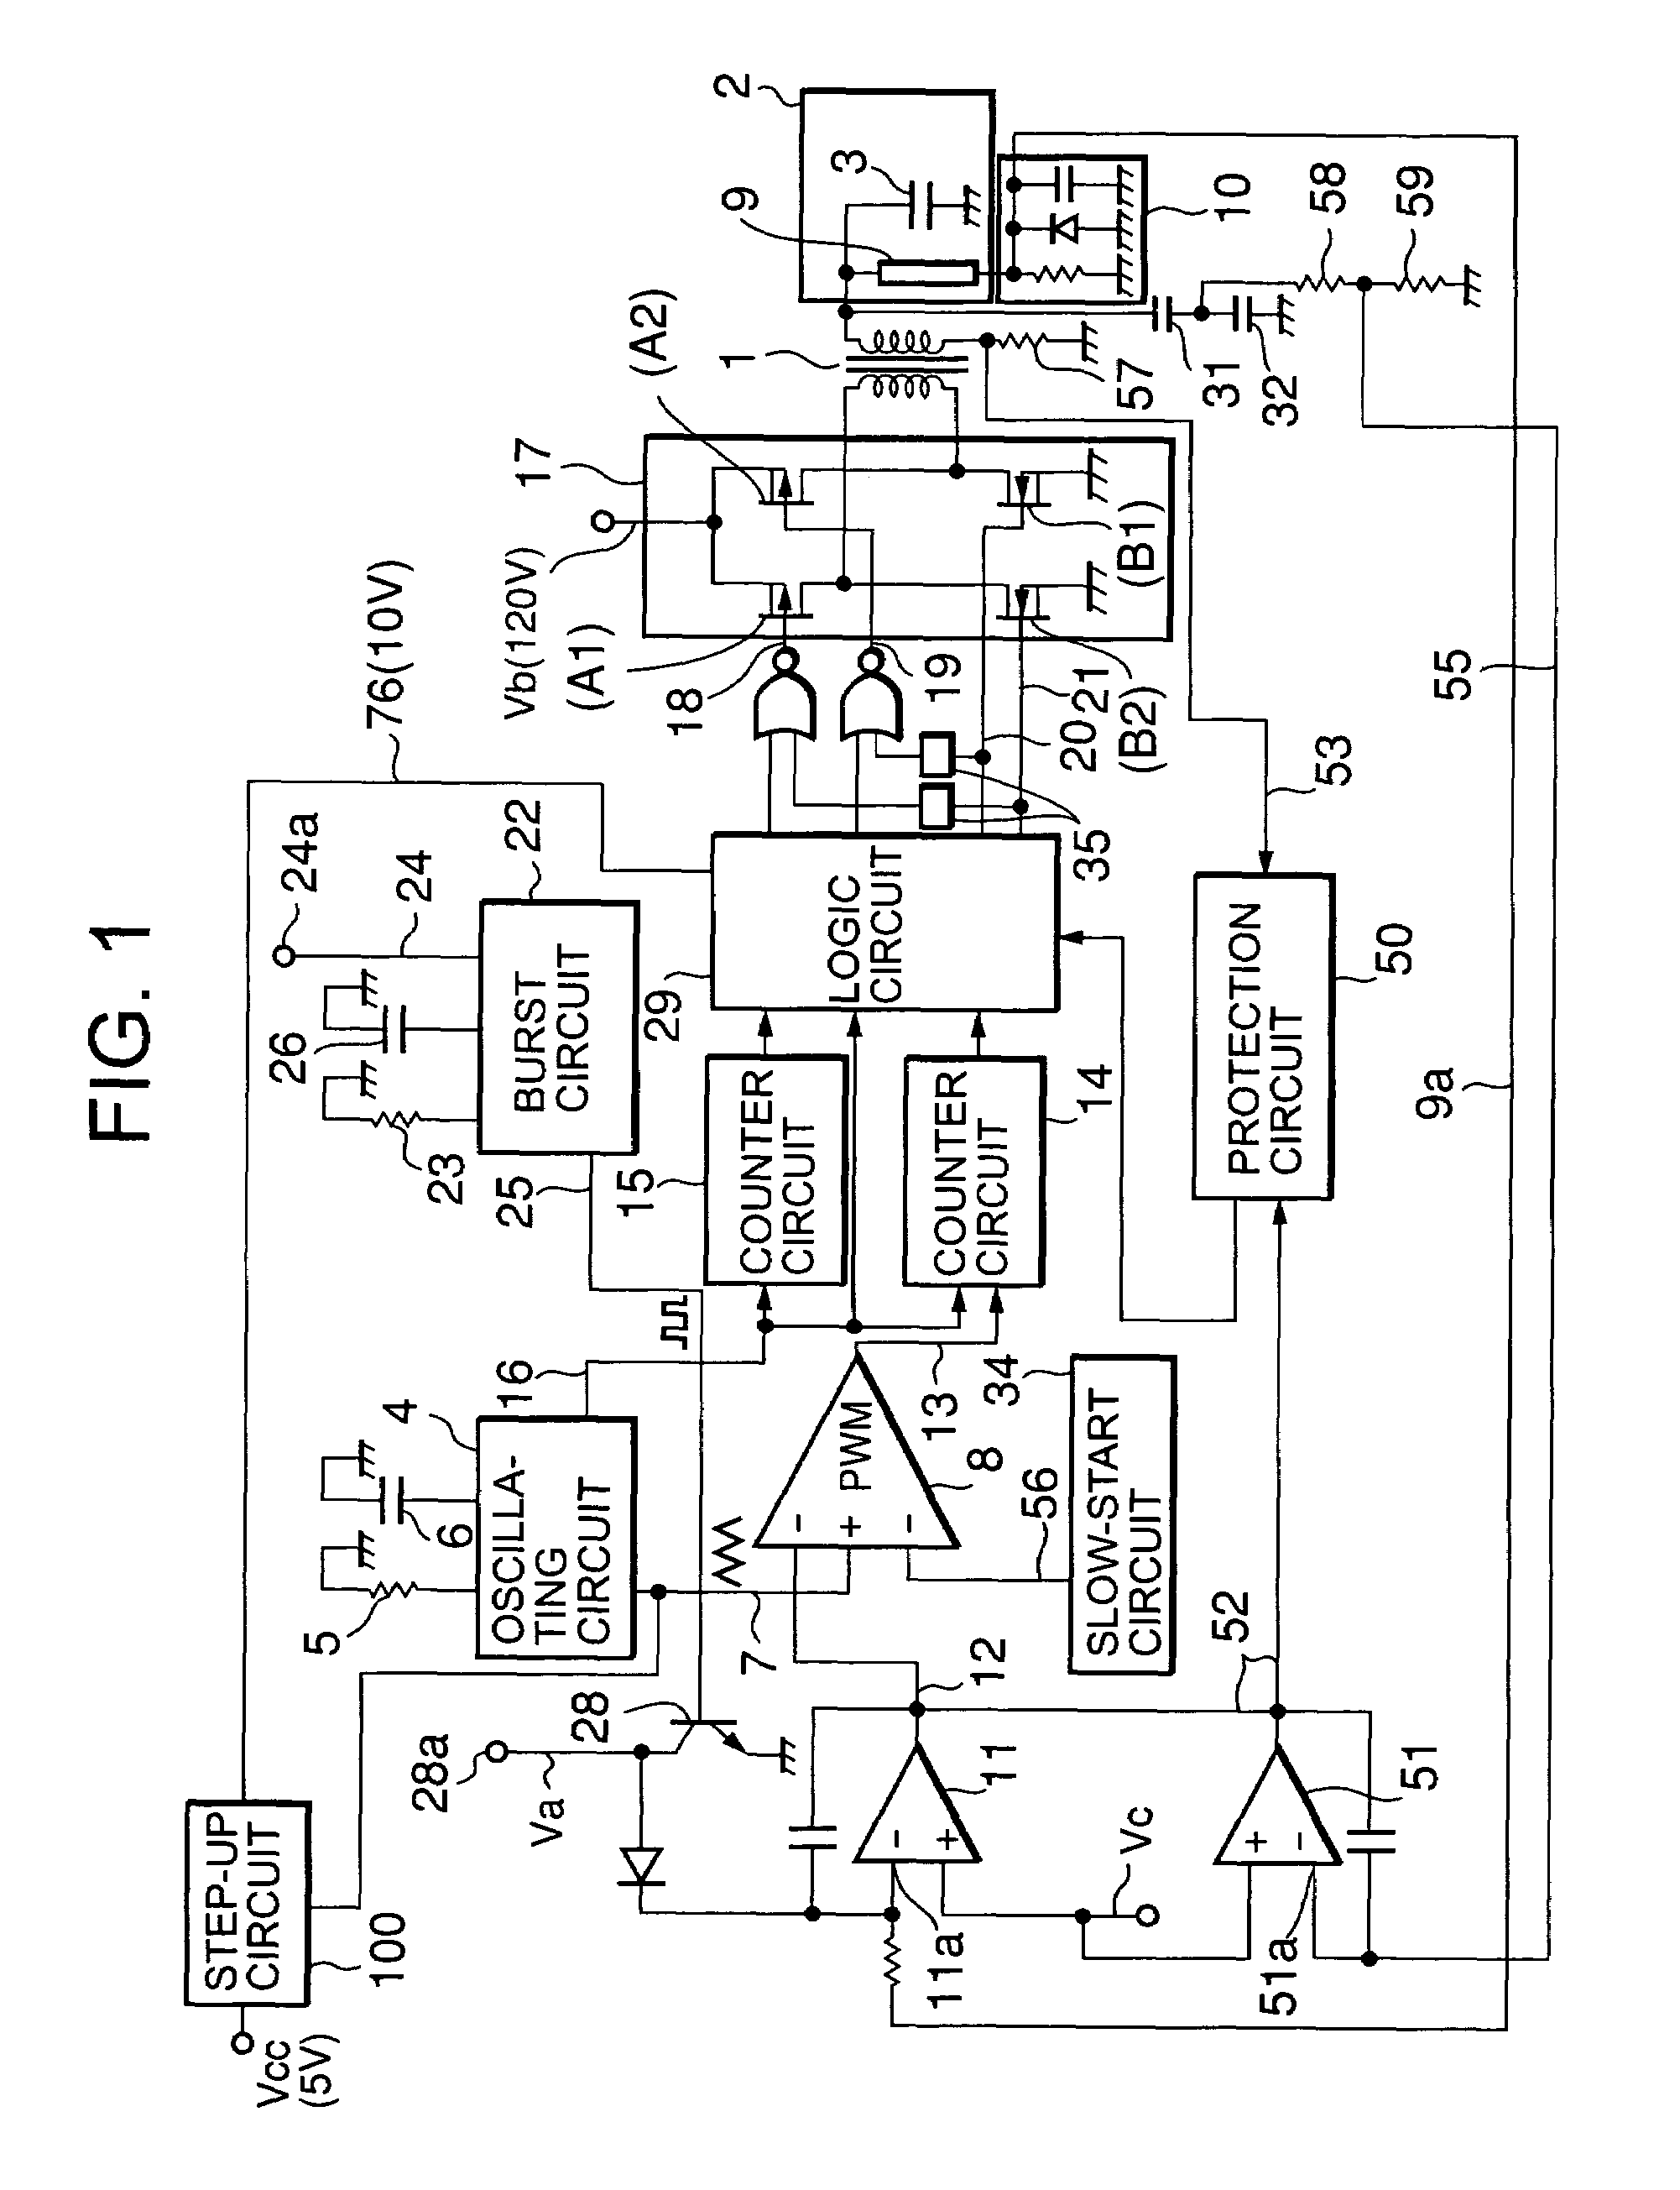 Inverter circuit for lighting discharge lamps with reduced power consumption